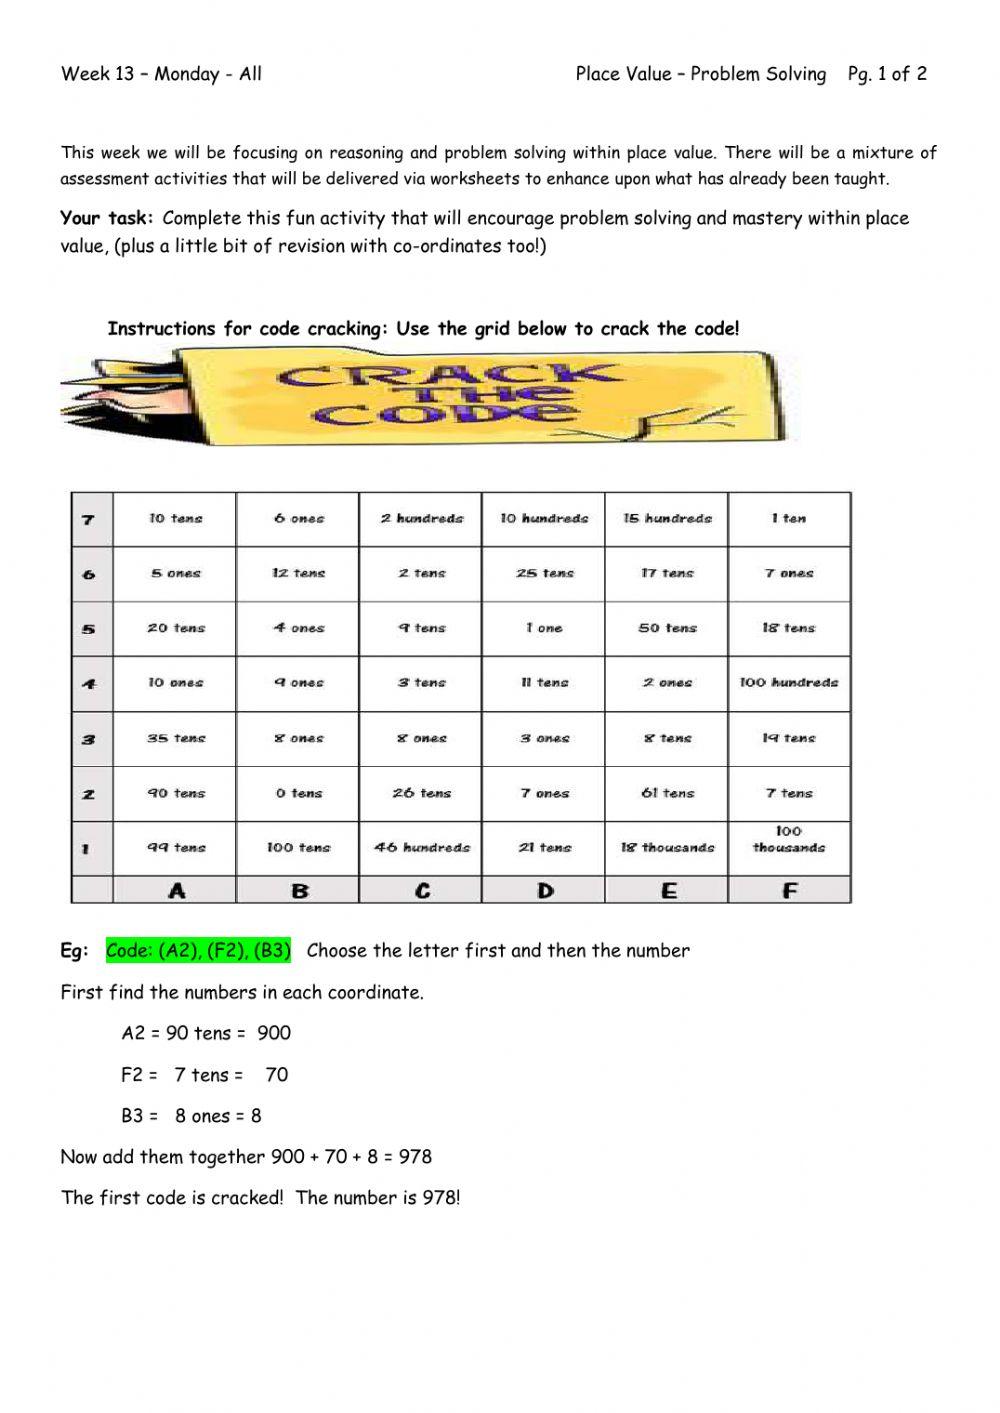 Week 13 - Monday - Place Value